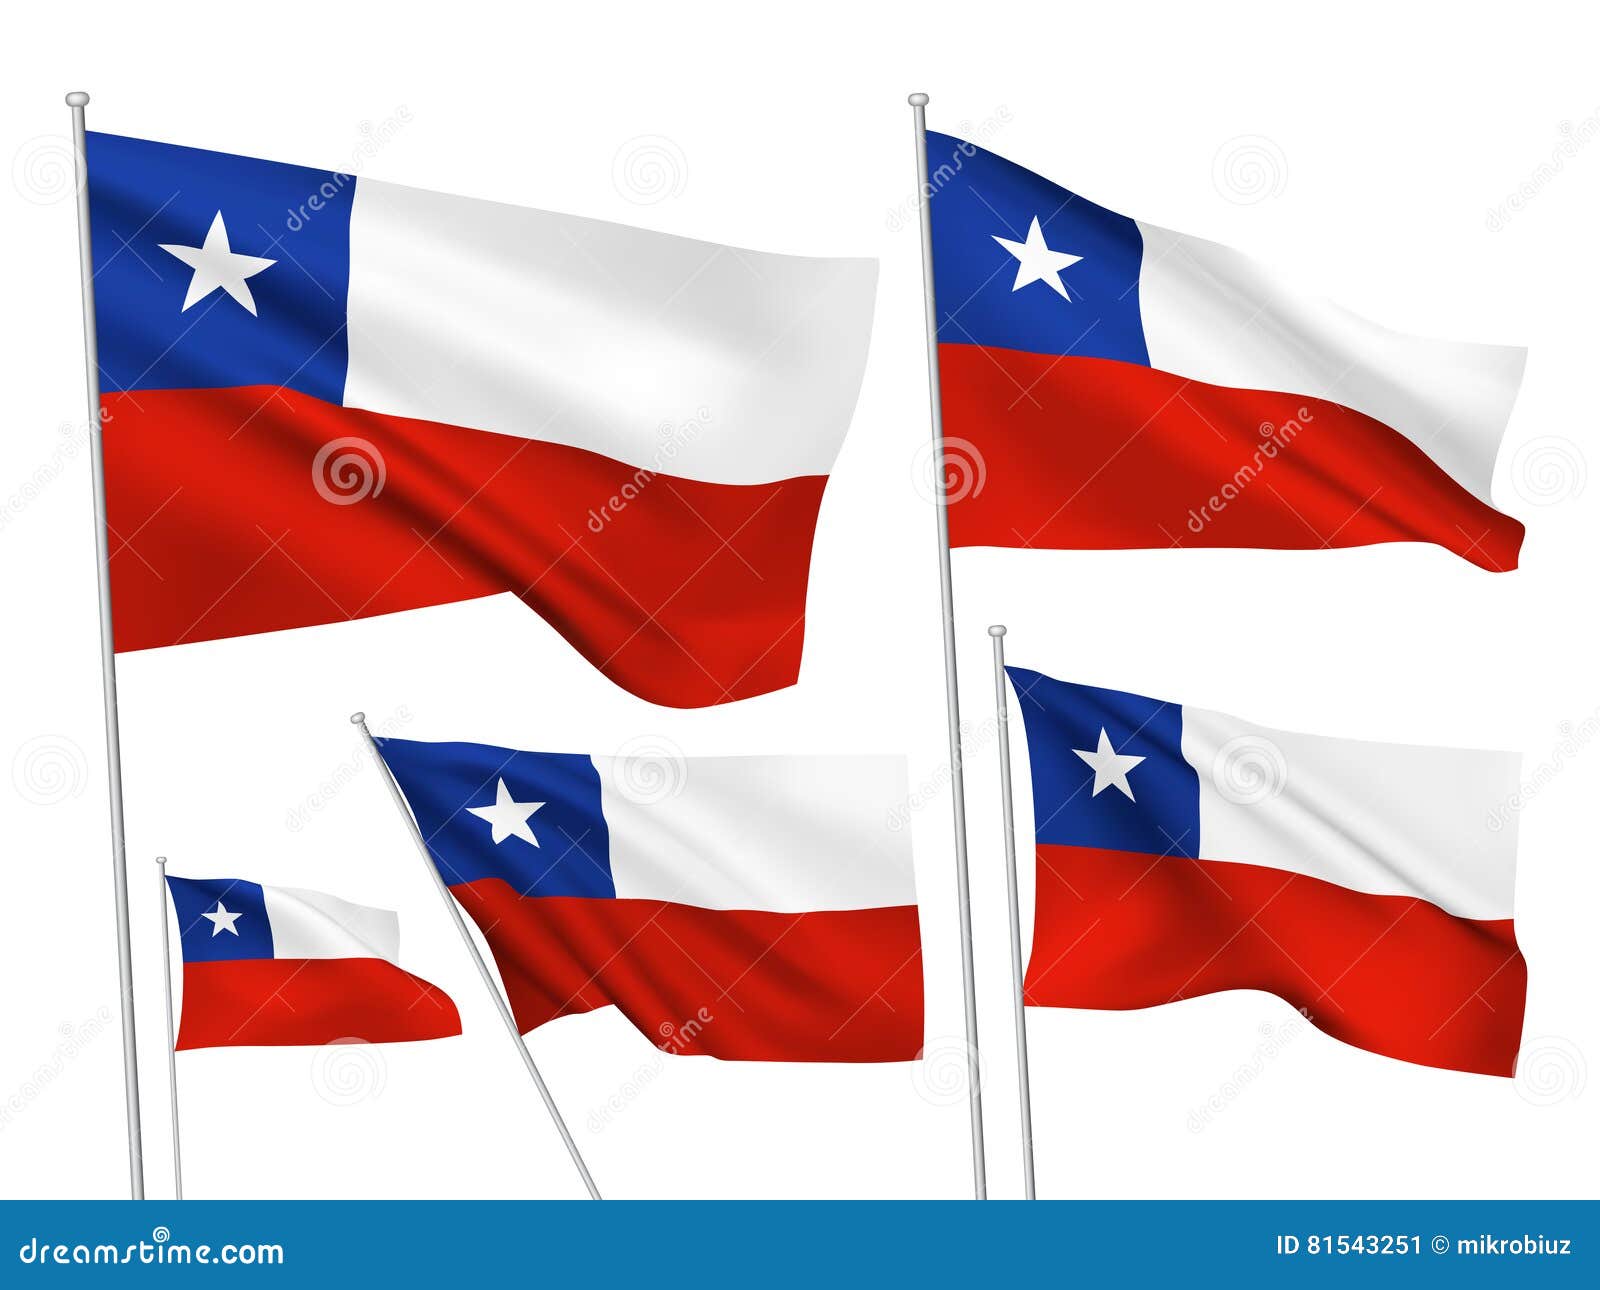 Chile Vector Flags Stock Vector Illustration Of Ensign 81543251